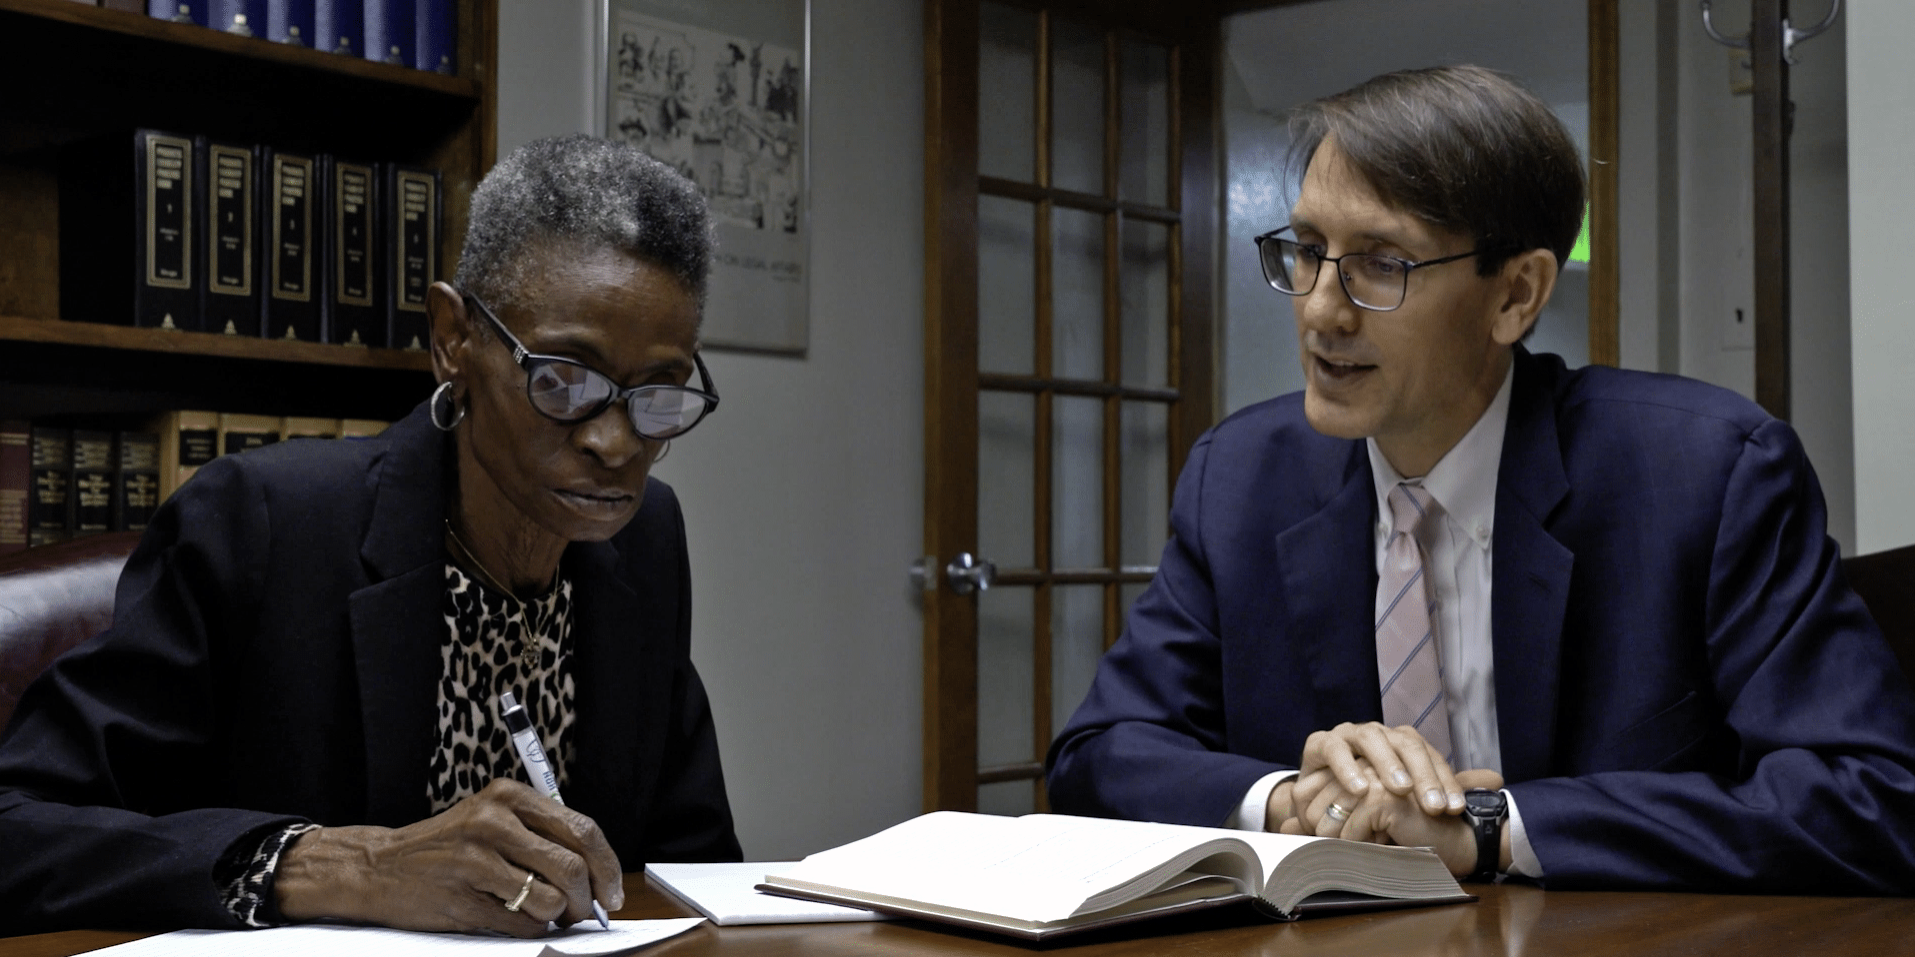 Micro Documentary Example: two individuals are seated at a table, an elderly black woman with gray in her hair, and a younger man with glasses. They are both dressed professionally. Papers and books are spread out on the table in front of them as they appear to be working together.